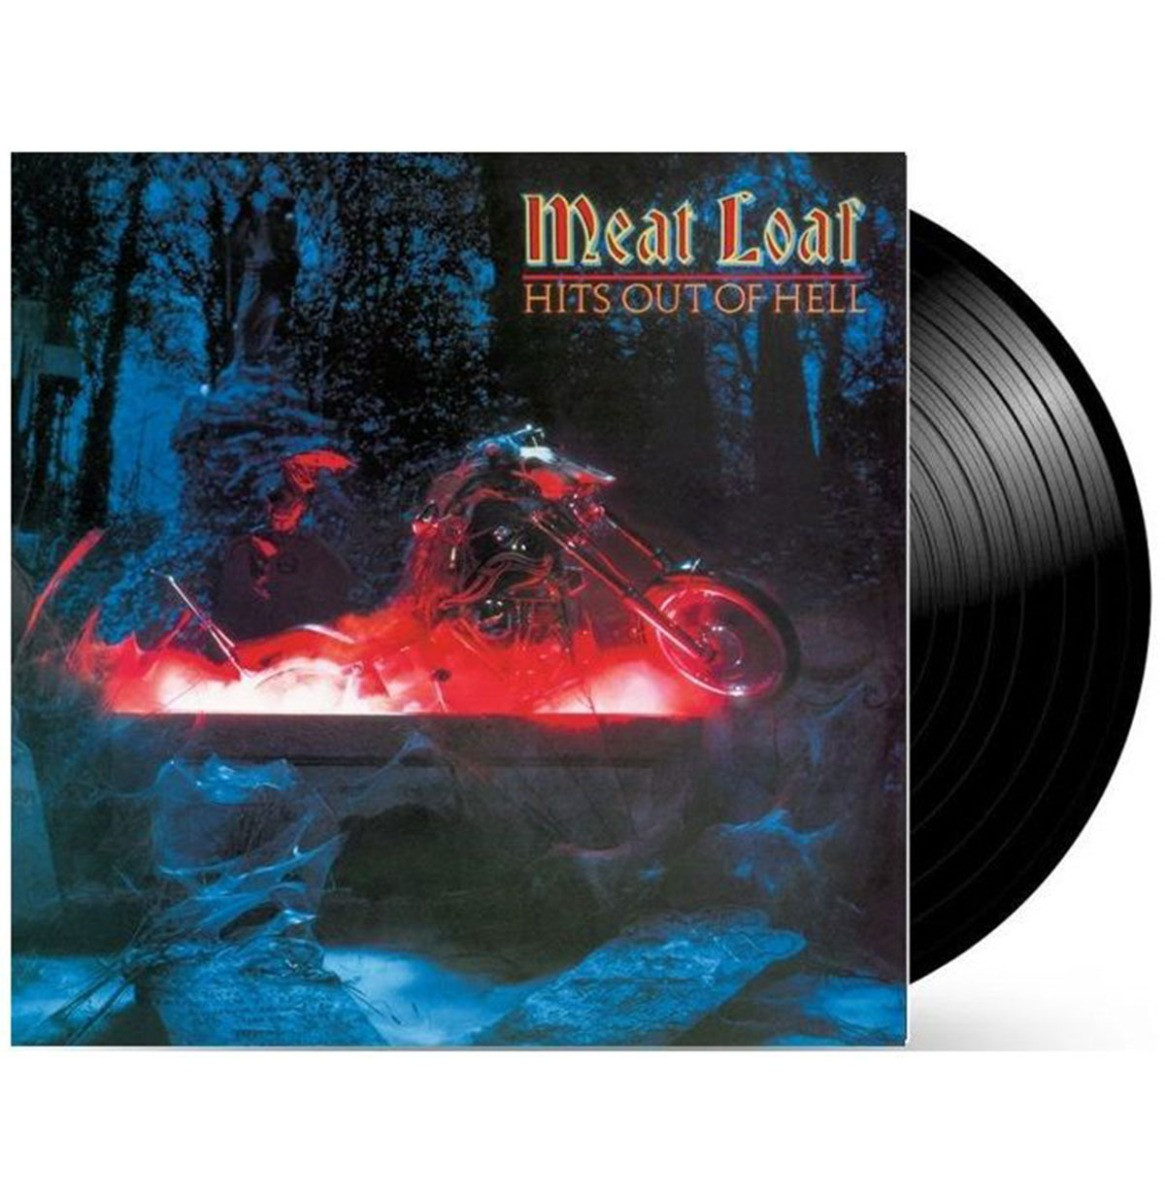 Meat Loaf - Hits Out Of Hell LP